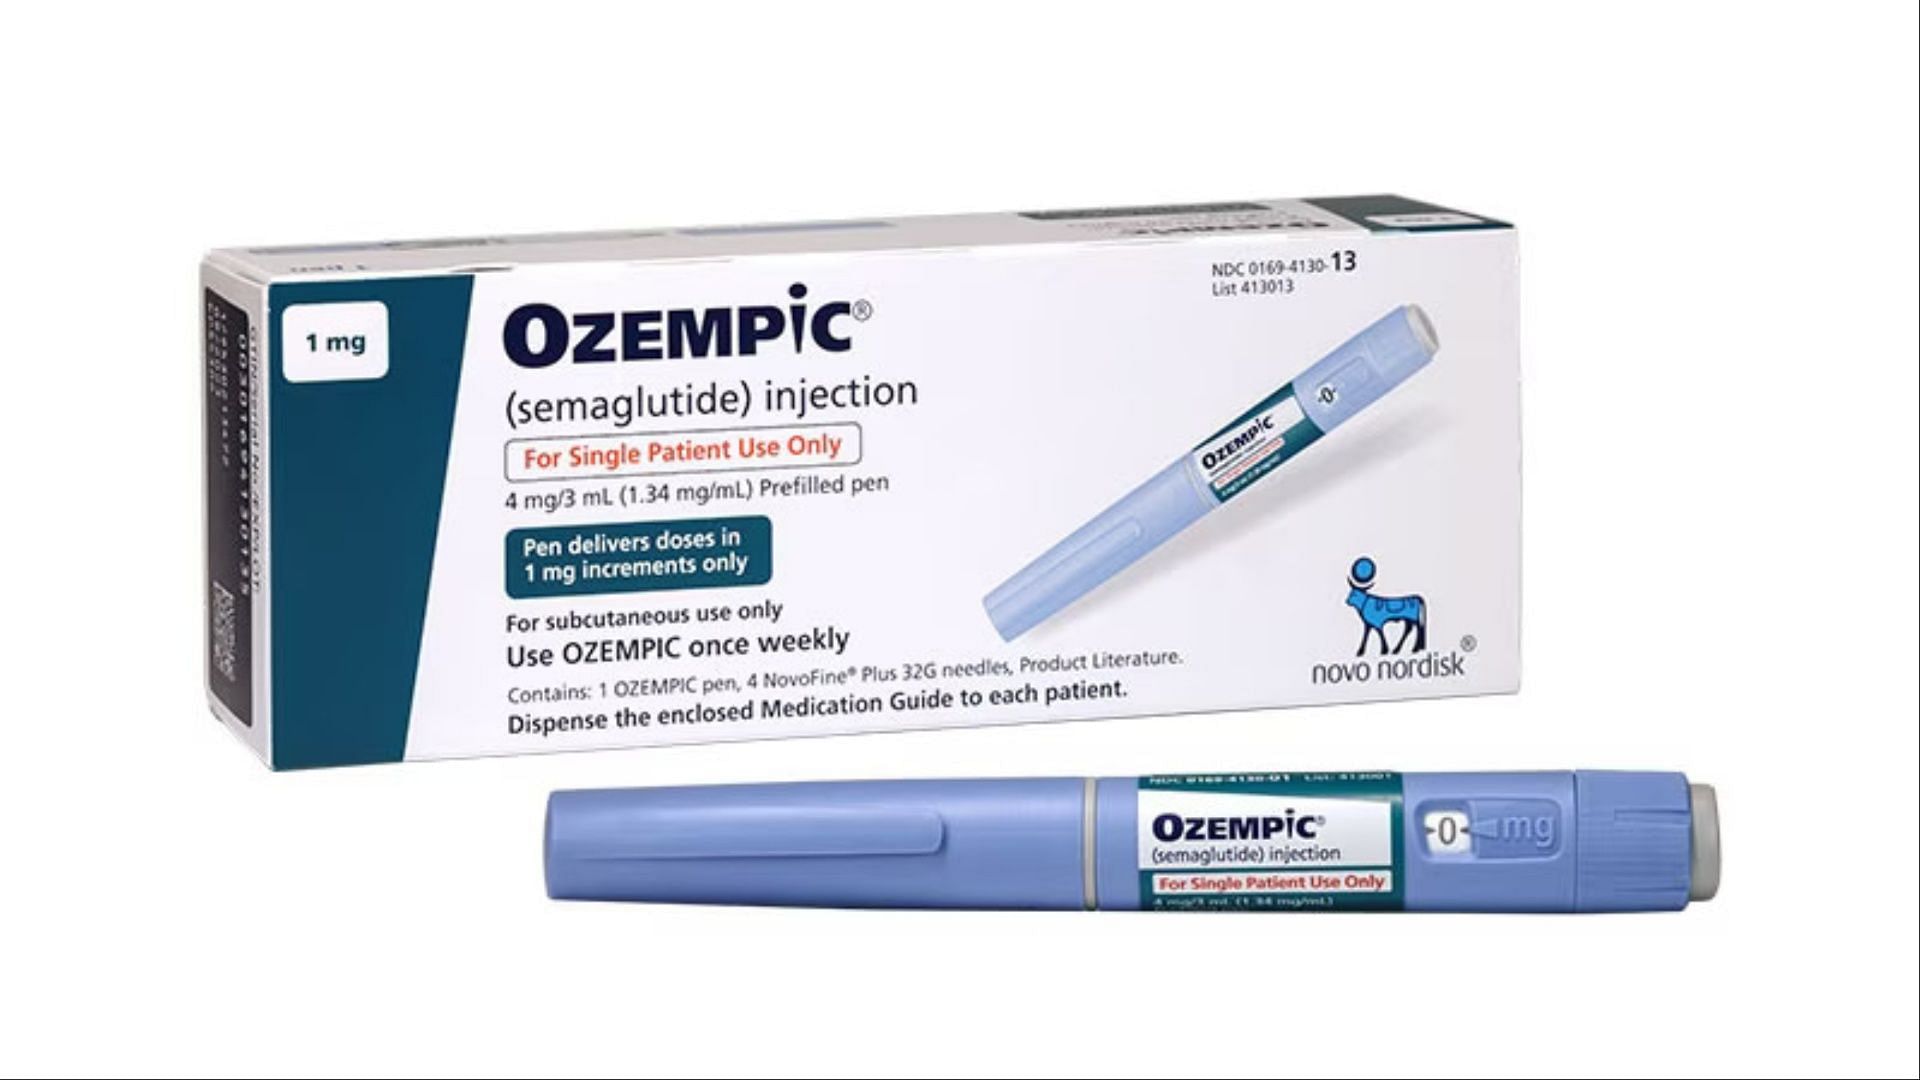 FDA issues warning about fake Ozempic